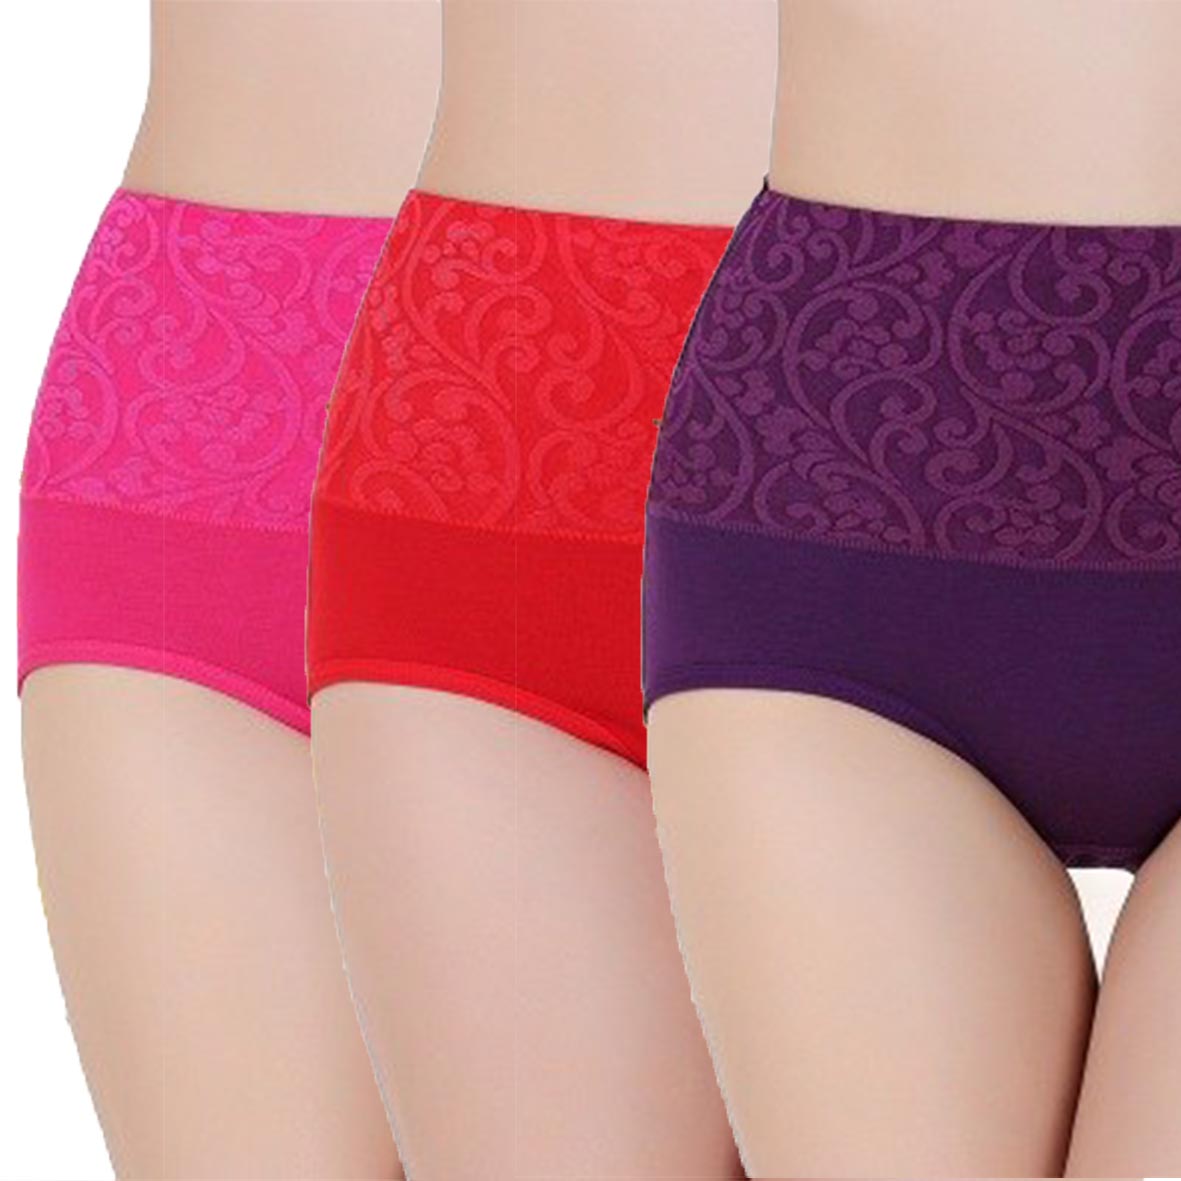 SENSITRA Sexy Women Lace Panty/Underwear - High Waist Full Coverage Ladies  Briefs to Hide Muffin Top and Side Bulges Assorted